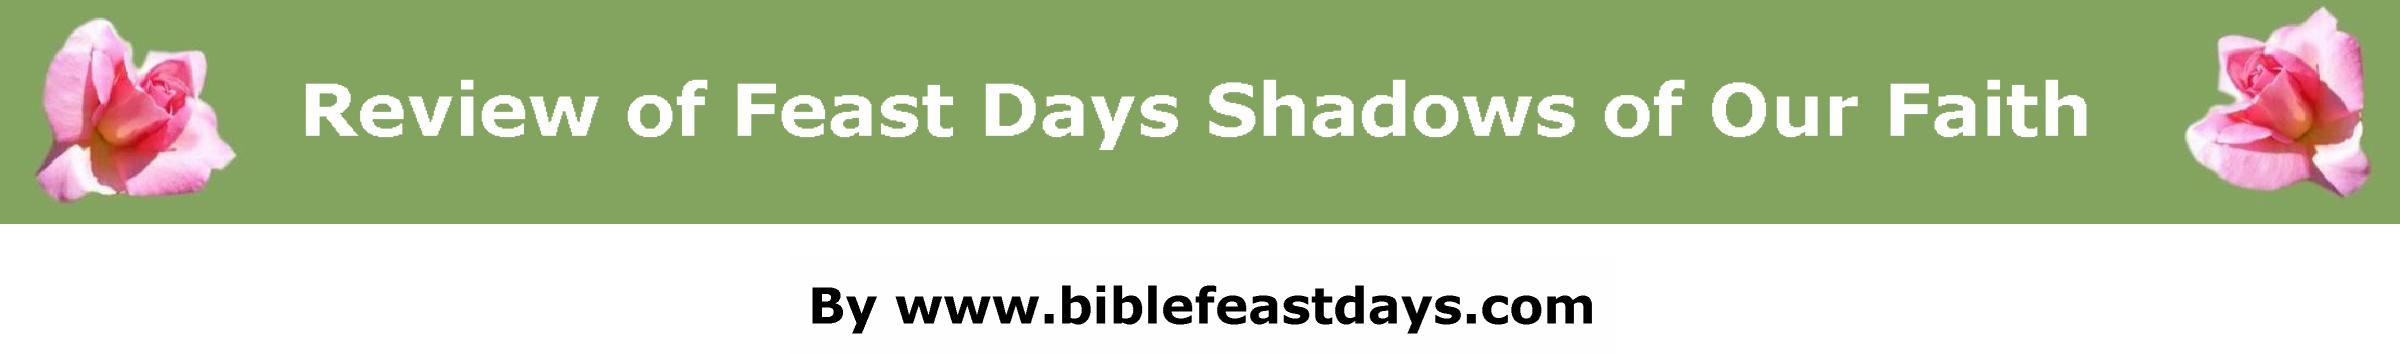 Review of Feast Days Shadows of Our Faith